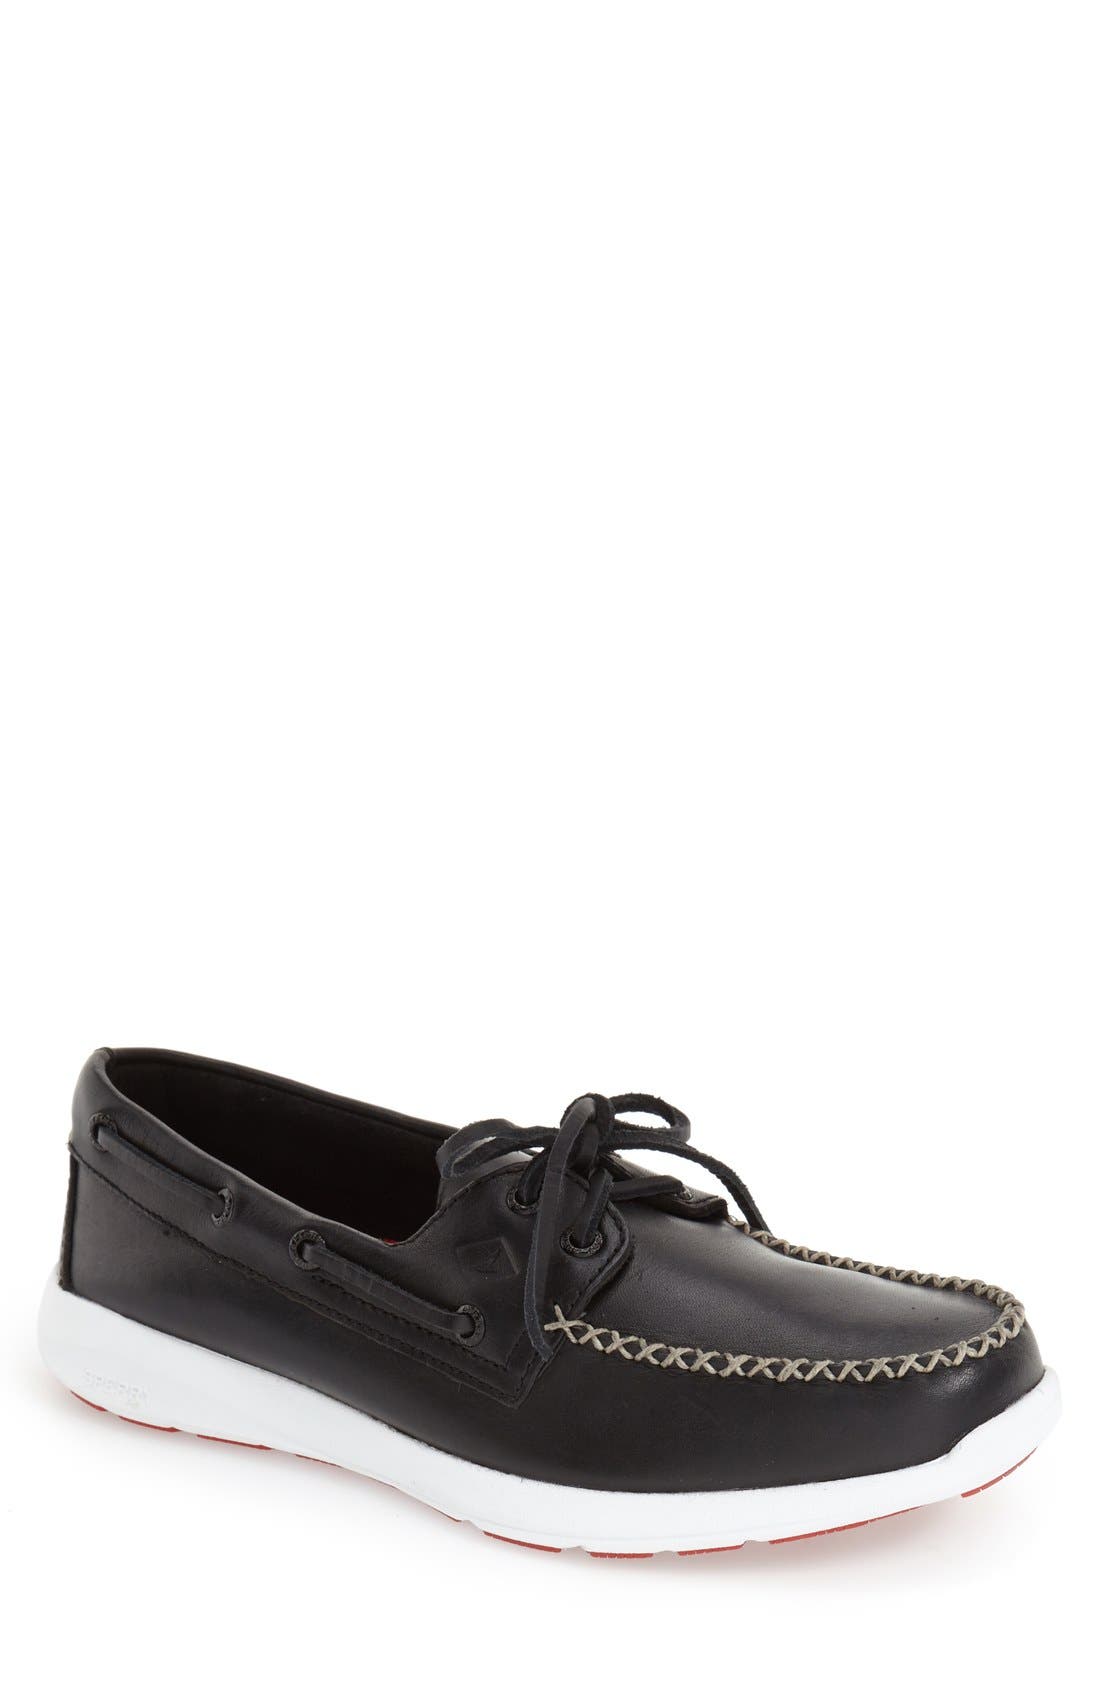 paul sperry boat shoes